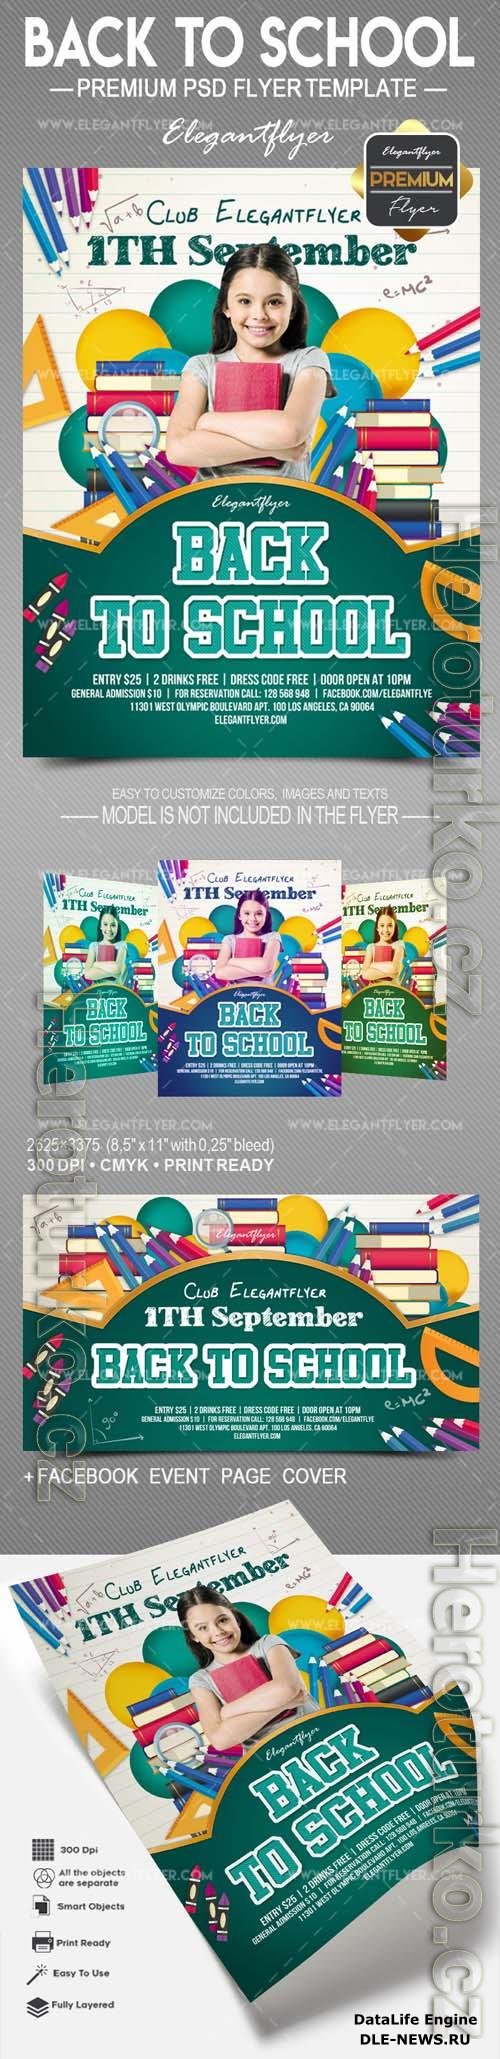 Back to School Flyer PSD Template vol 5